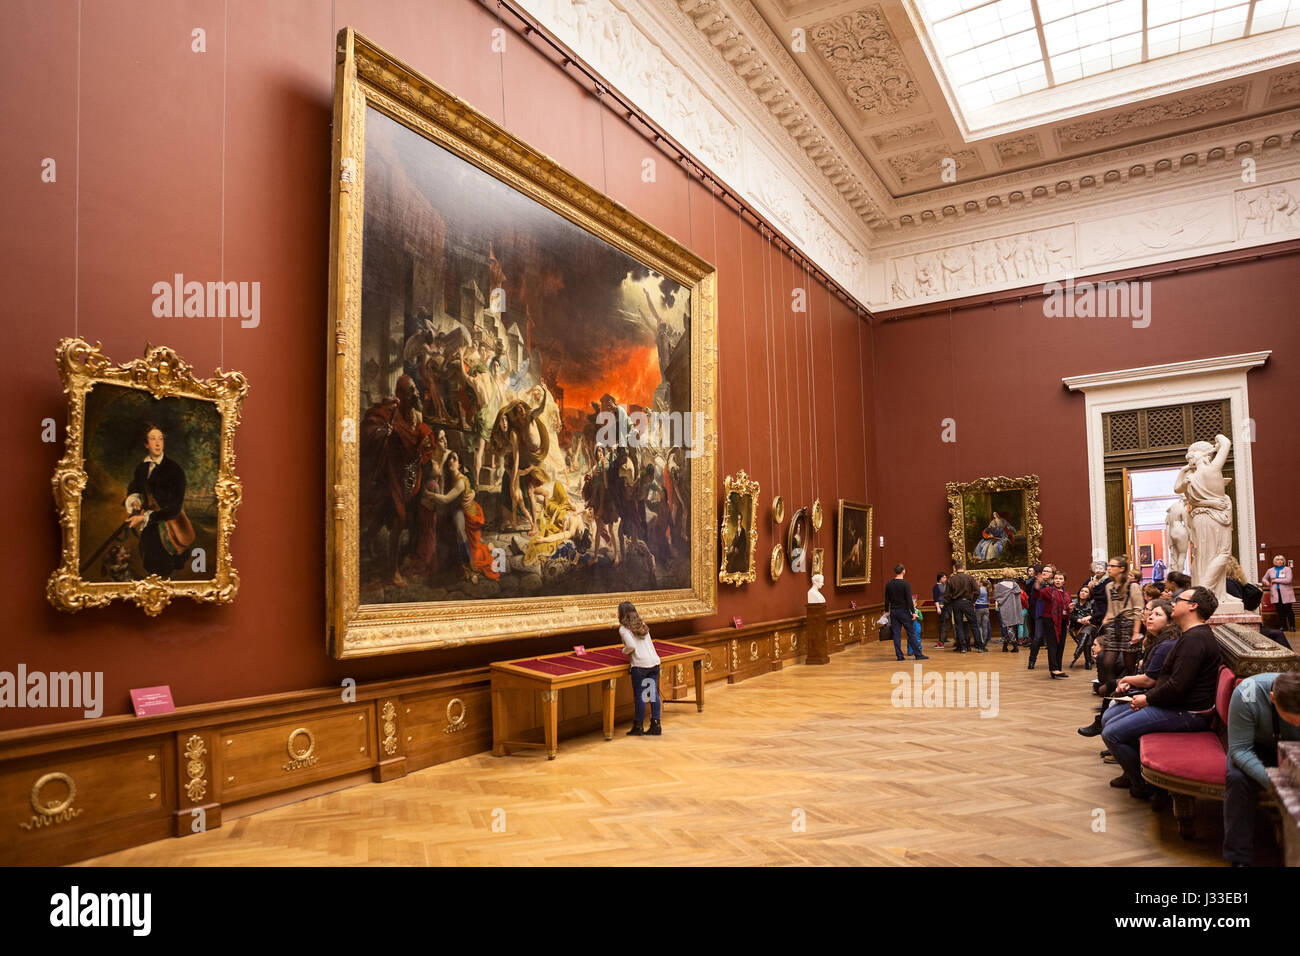 ST. PETERSBURG, RUSSIA - CIRCA APR, 2017: People sit at the benches near picture of 'The Last Day of Pompeii', artist Karl Bryullov. Interior of the S Stock Photo